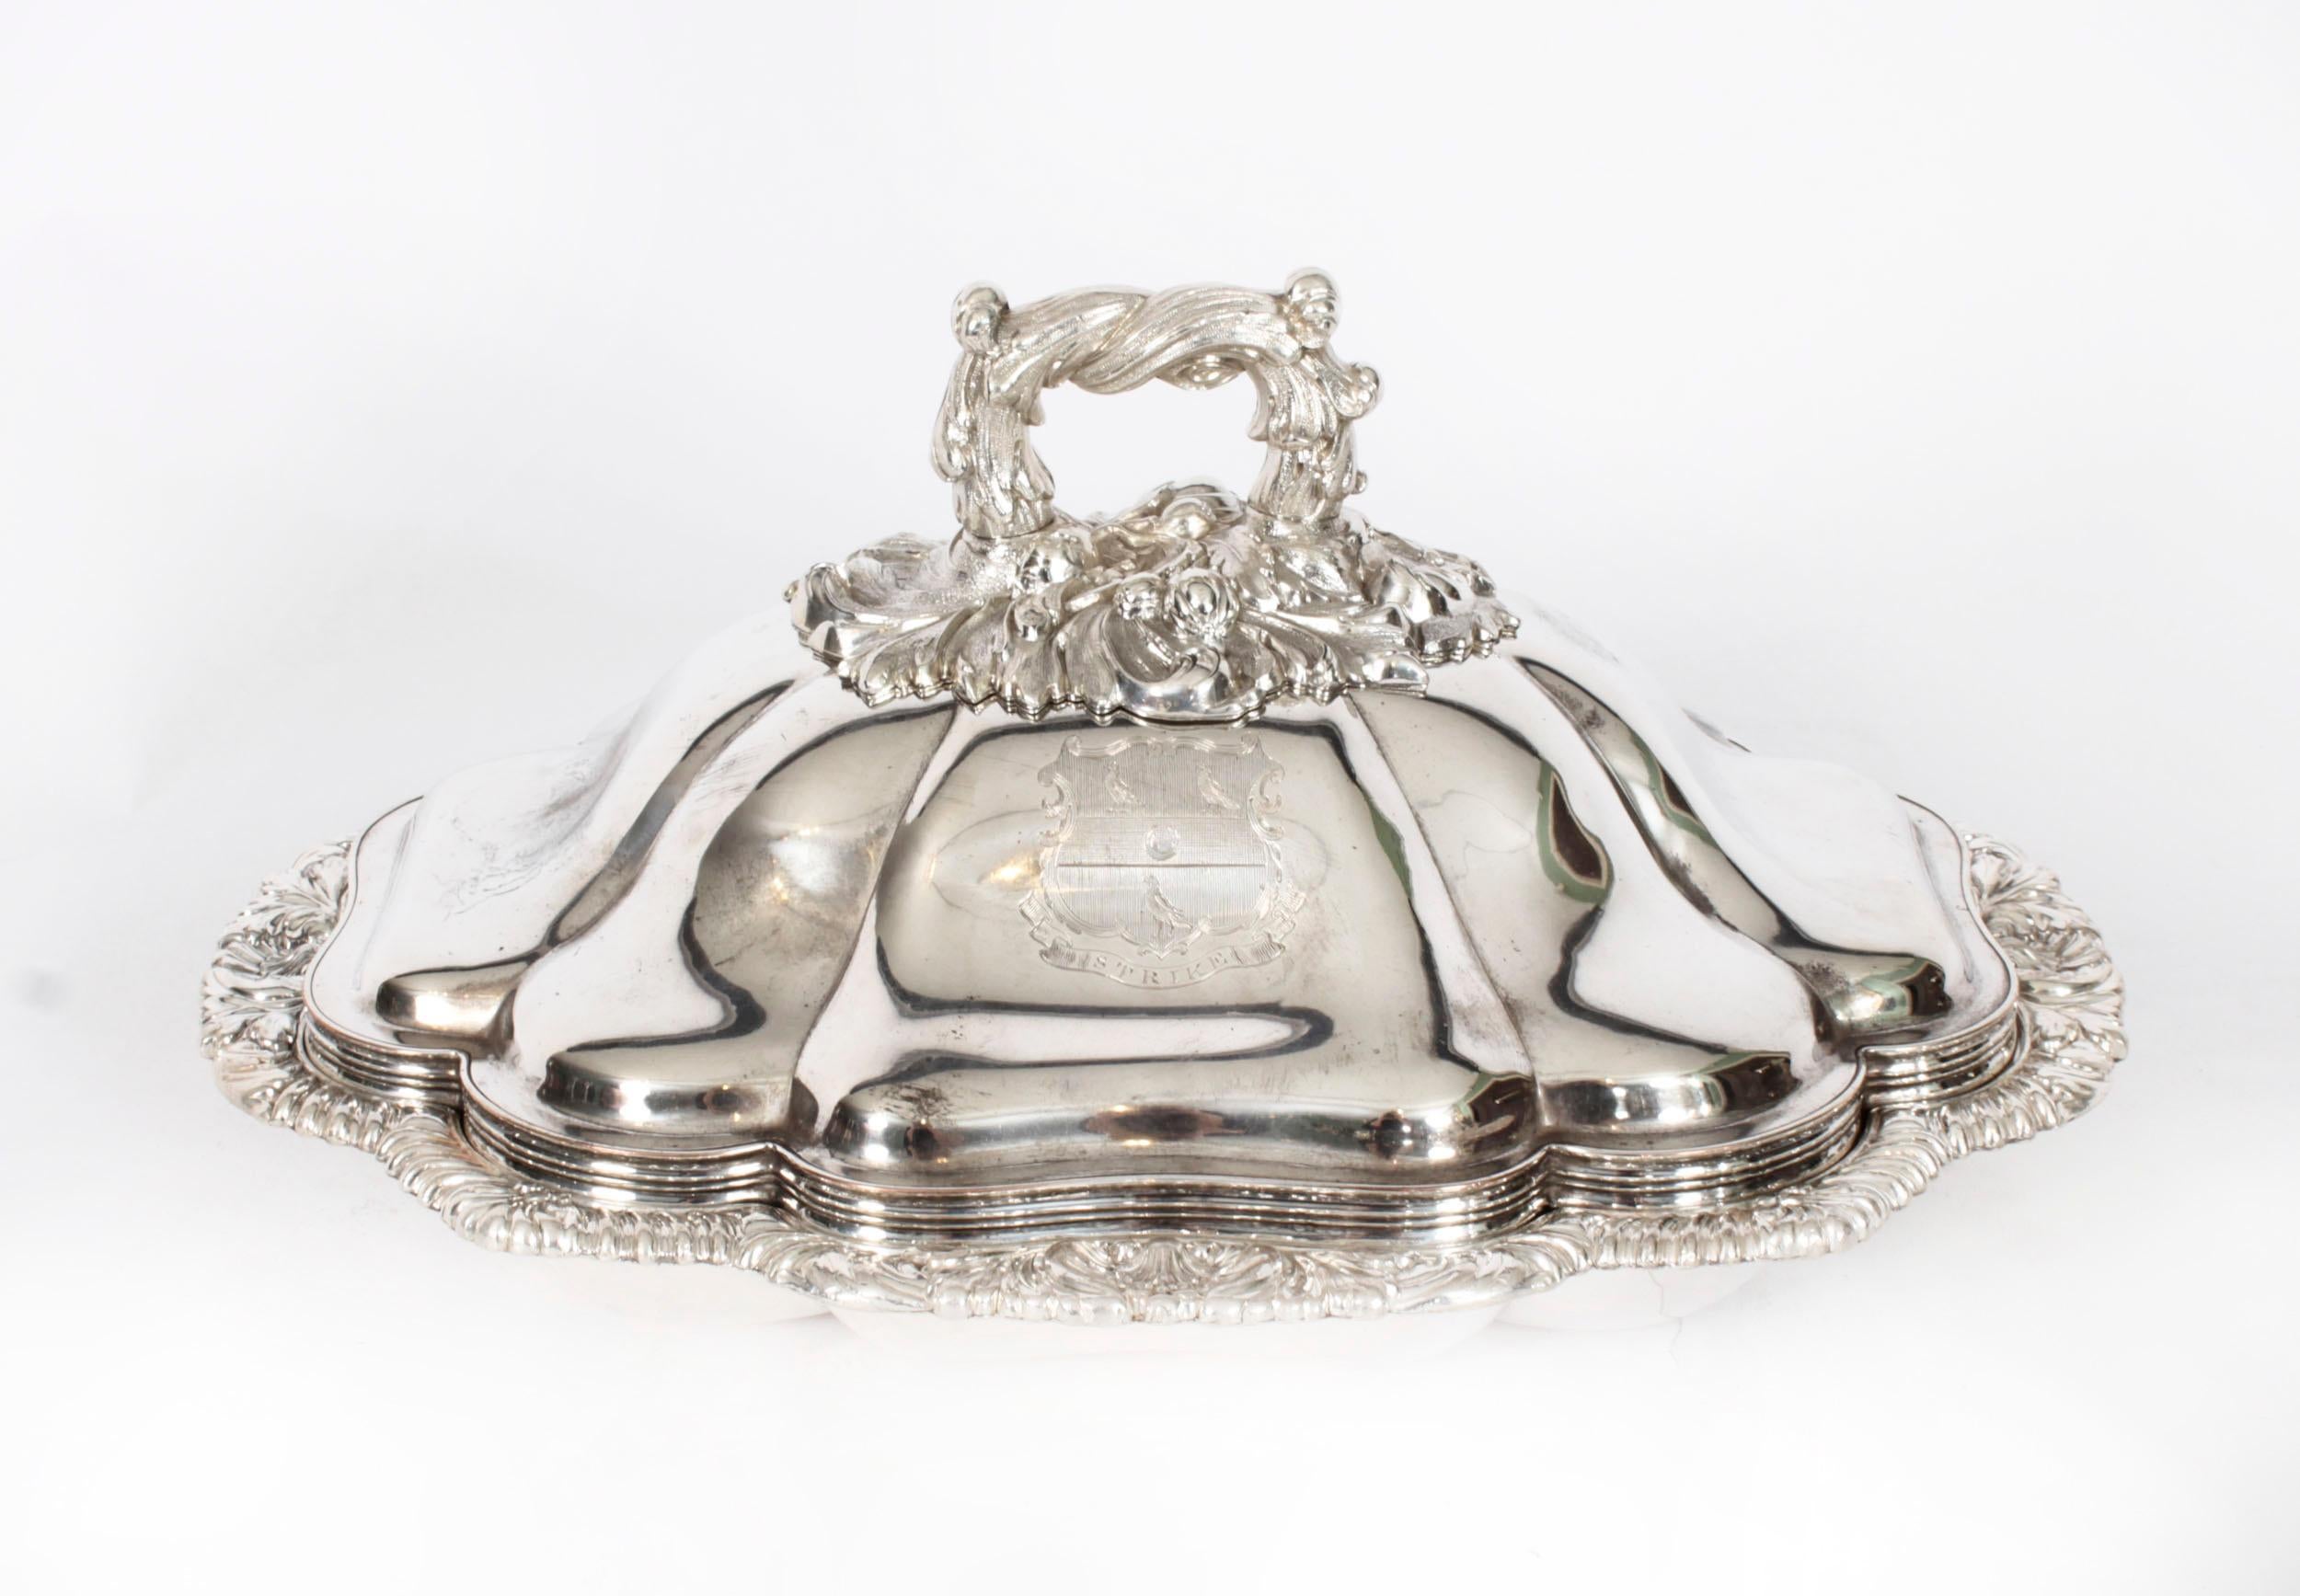 This is an exquisitely high-quality and rare antique pair of English Old Sheffield Plate, silver plated on copper,  domed entree dishes, each with lid and stand, circa 1780 in date.

These stunning shaped oblong entree dishes feature  impressive